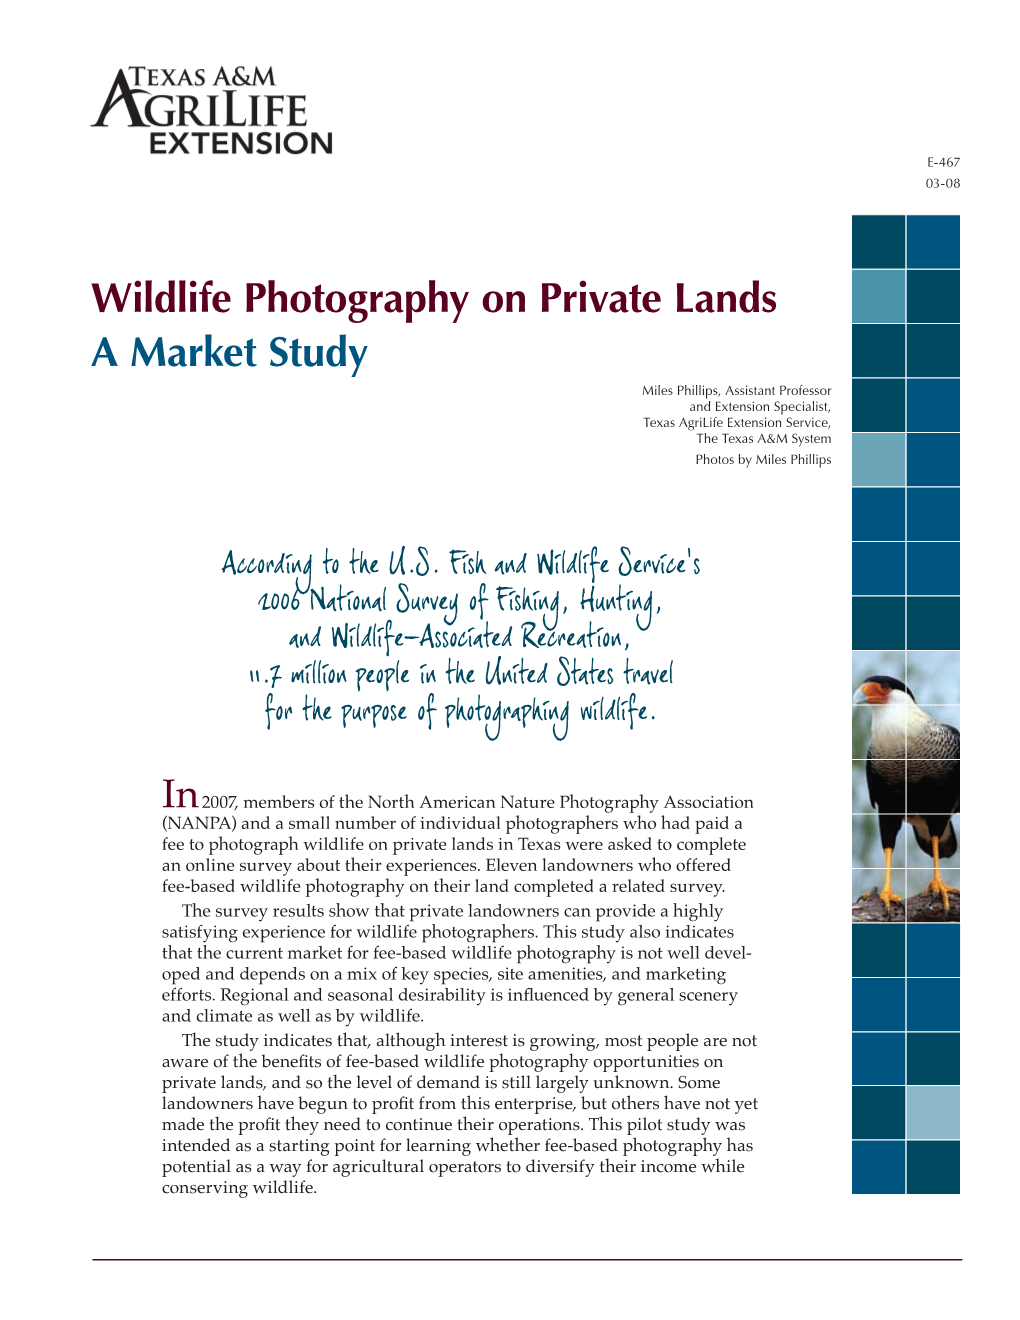 Wildlife Photography on Private Lands a Market Study